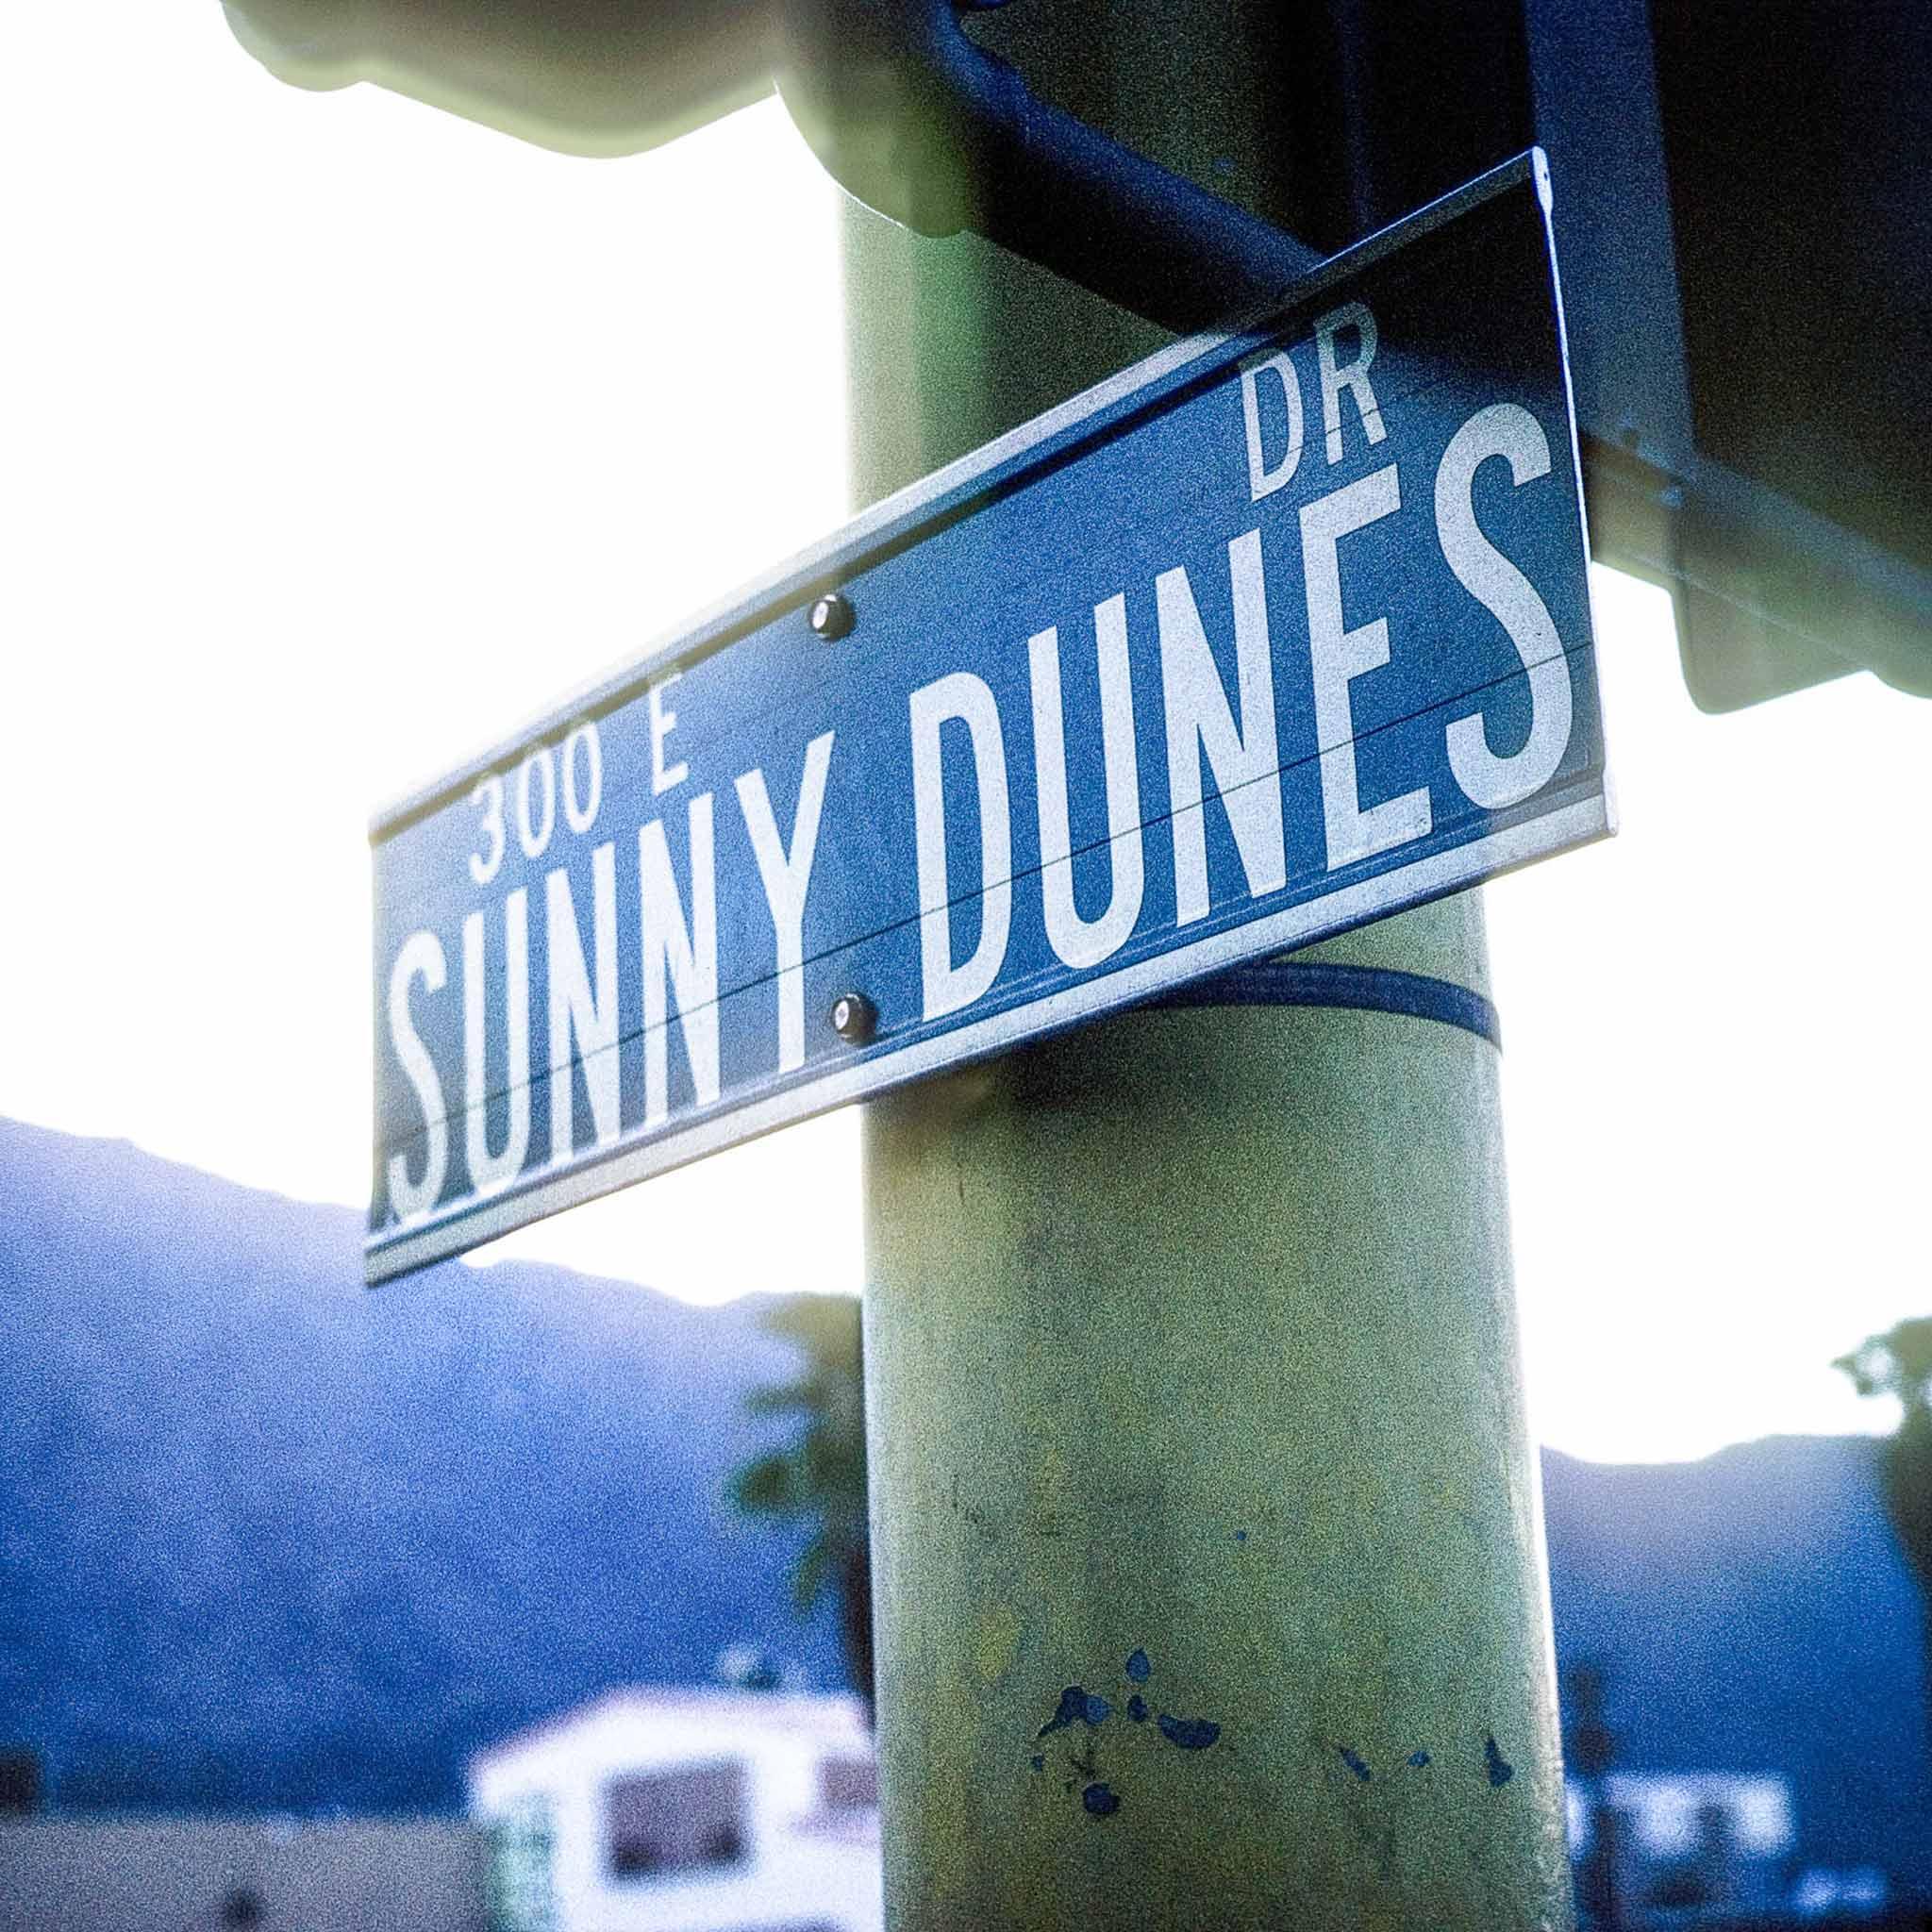 A street sign that reads "Sunny Dunes Dr"